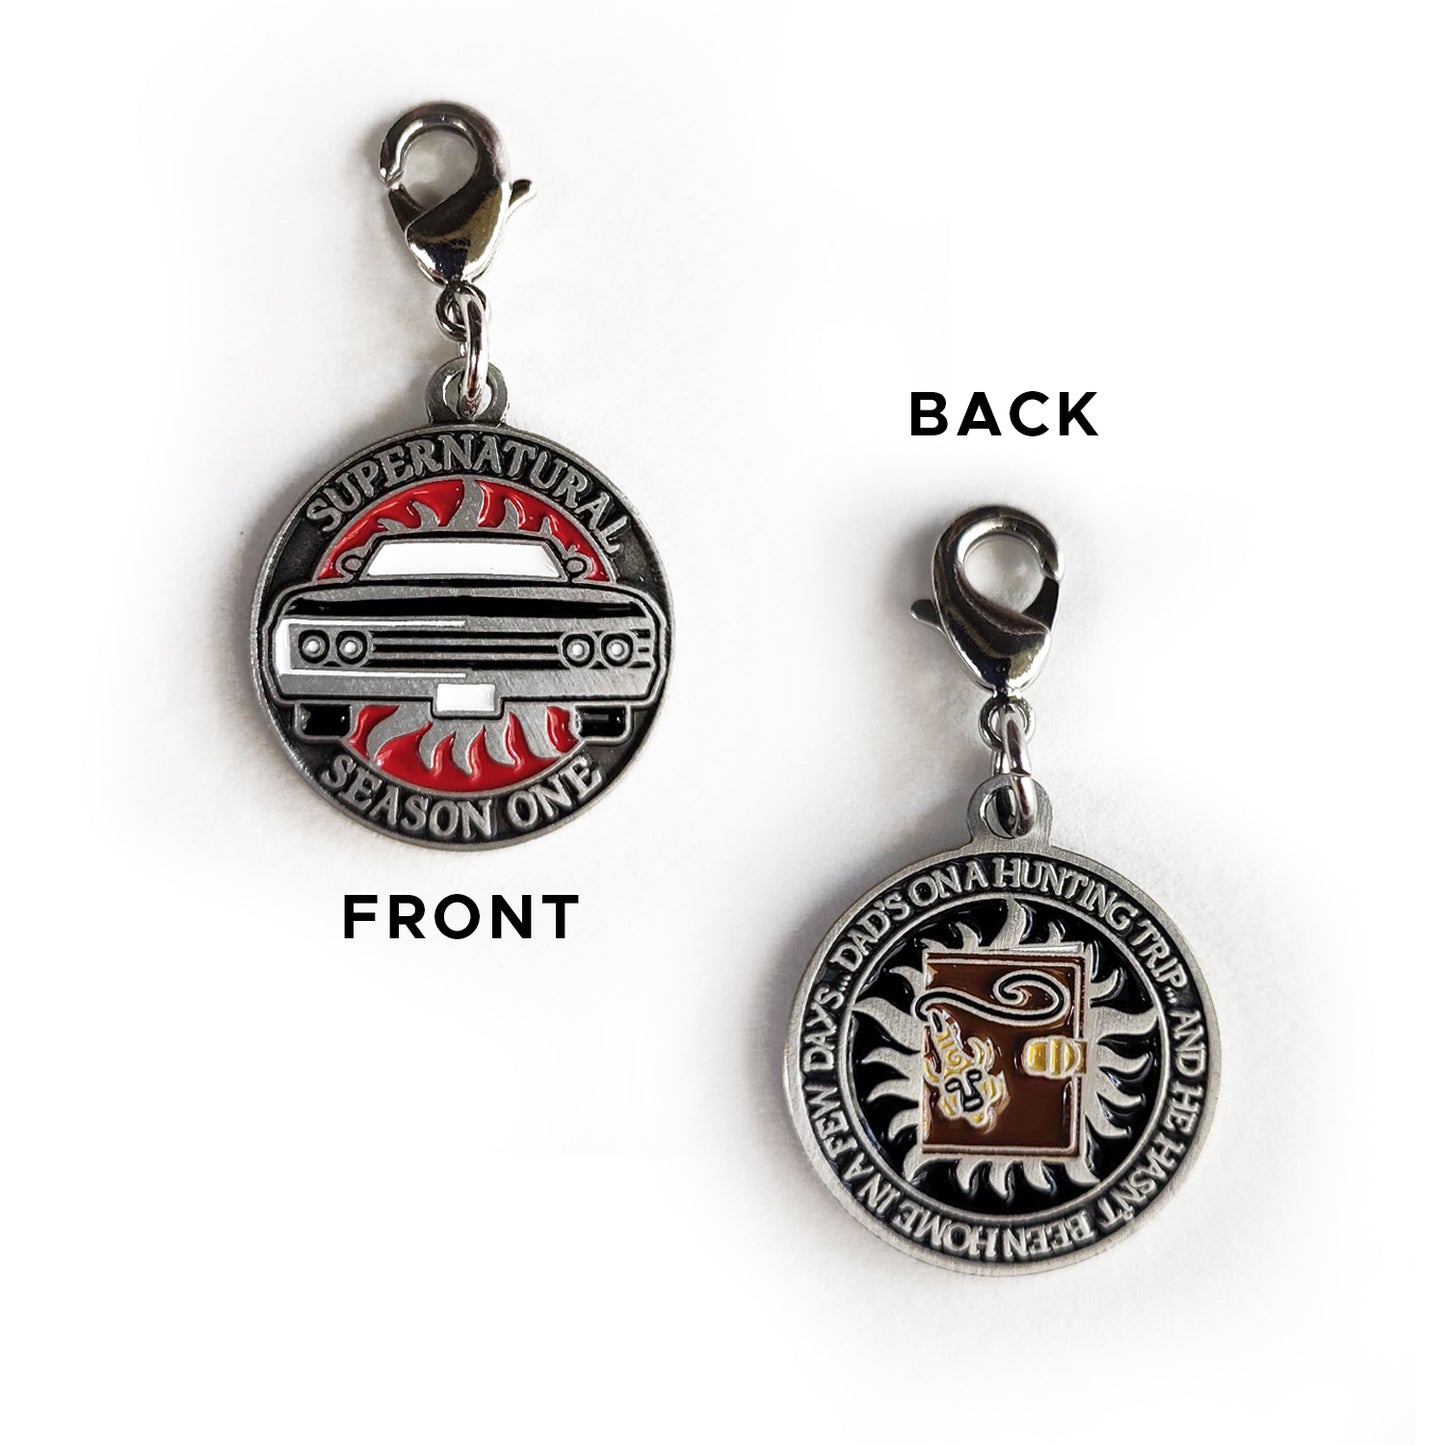 A brass coin charm with "Supernatural season one", a black Impala and an anti-possession symbol on one side and "Dad's on a hunting trip, and he hasn't been back in a few days" with a brown journal and amulet on the other.